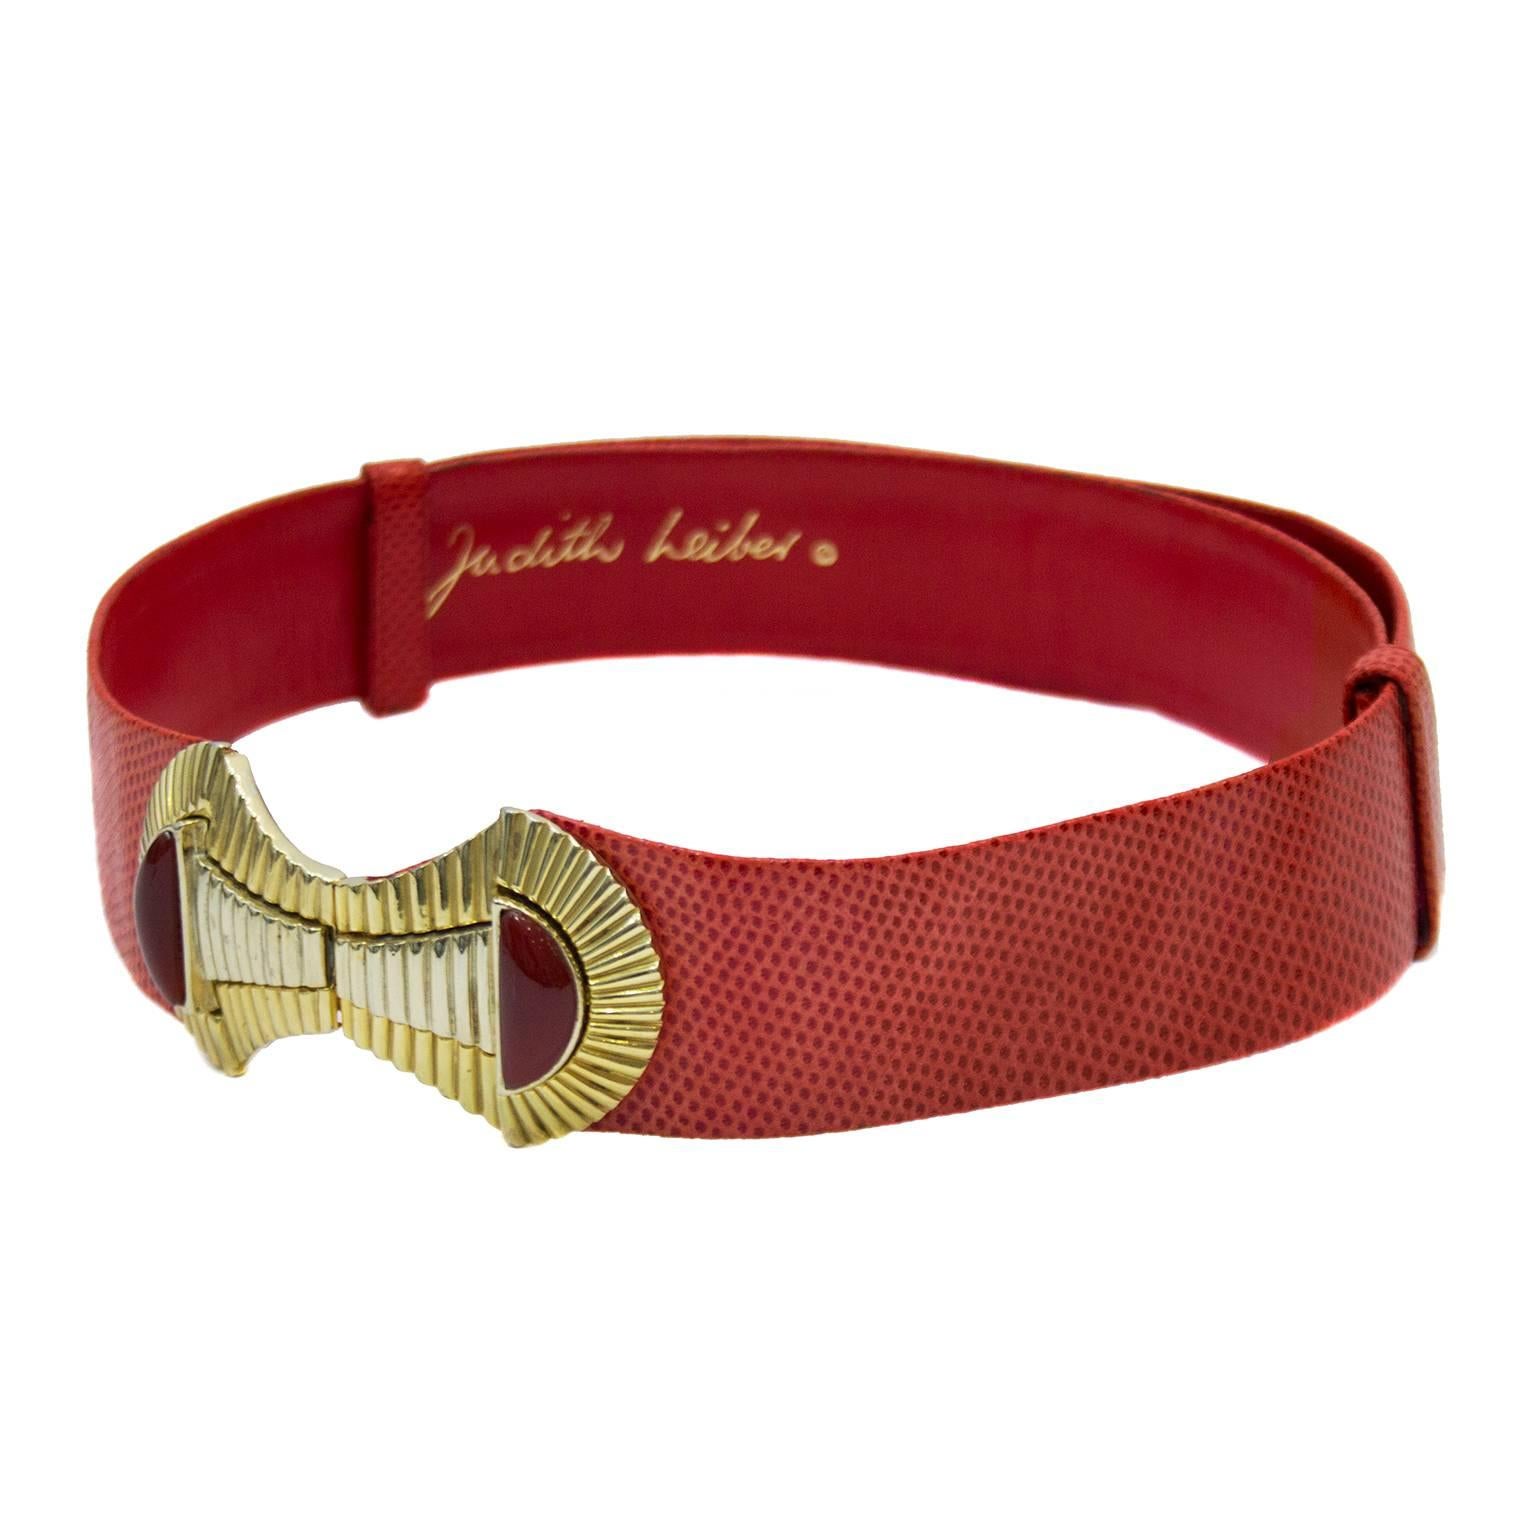 1980s red lizard Judith Leiber adjustable belt. Large gold and silver tone buckle with hook closure. Interior gold brand stamp. Excellent vintage condition. 39" at loosest, 30" at tightest. 
